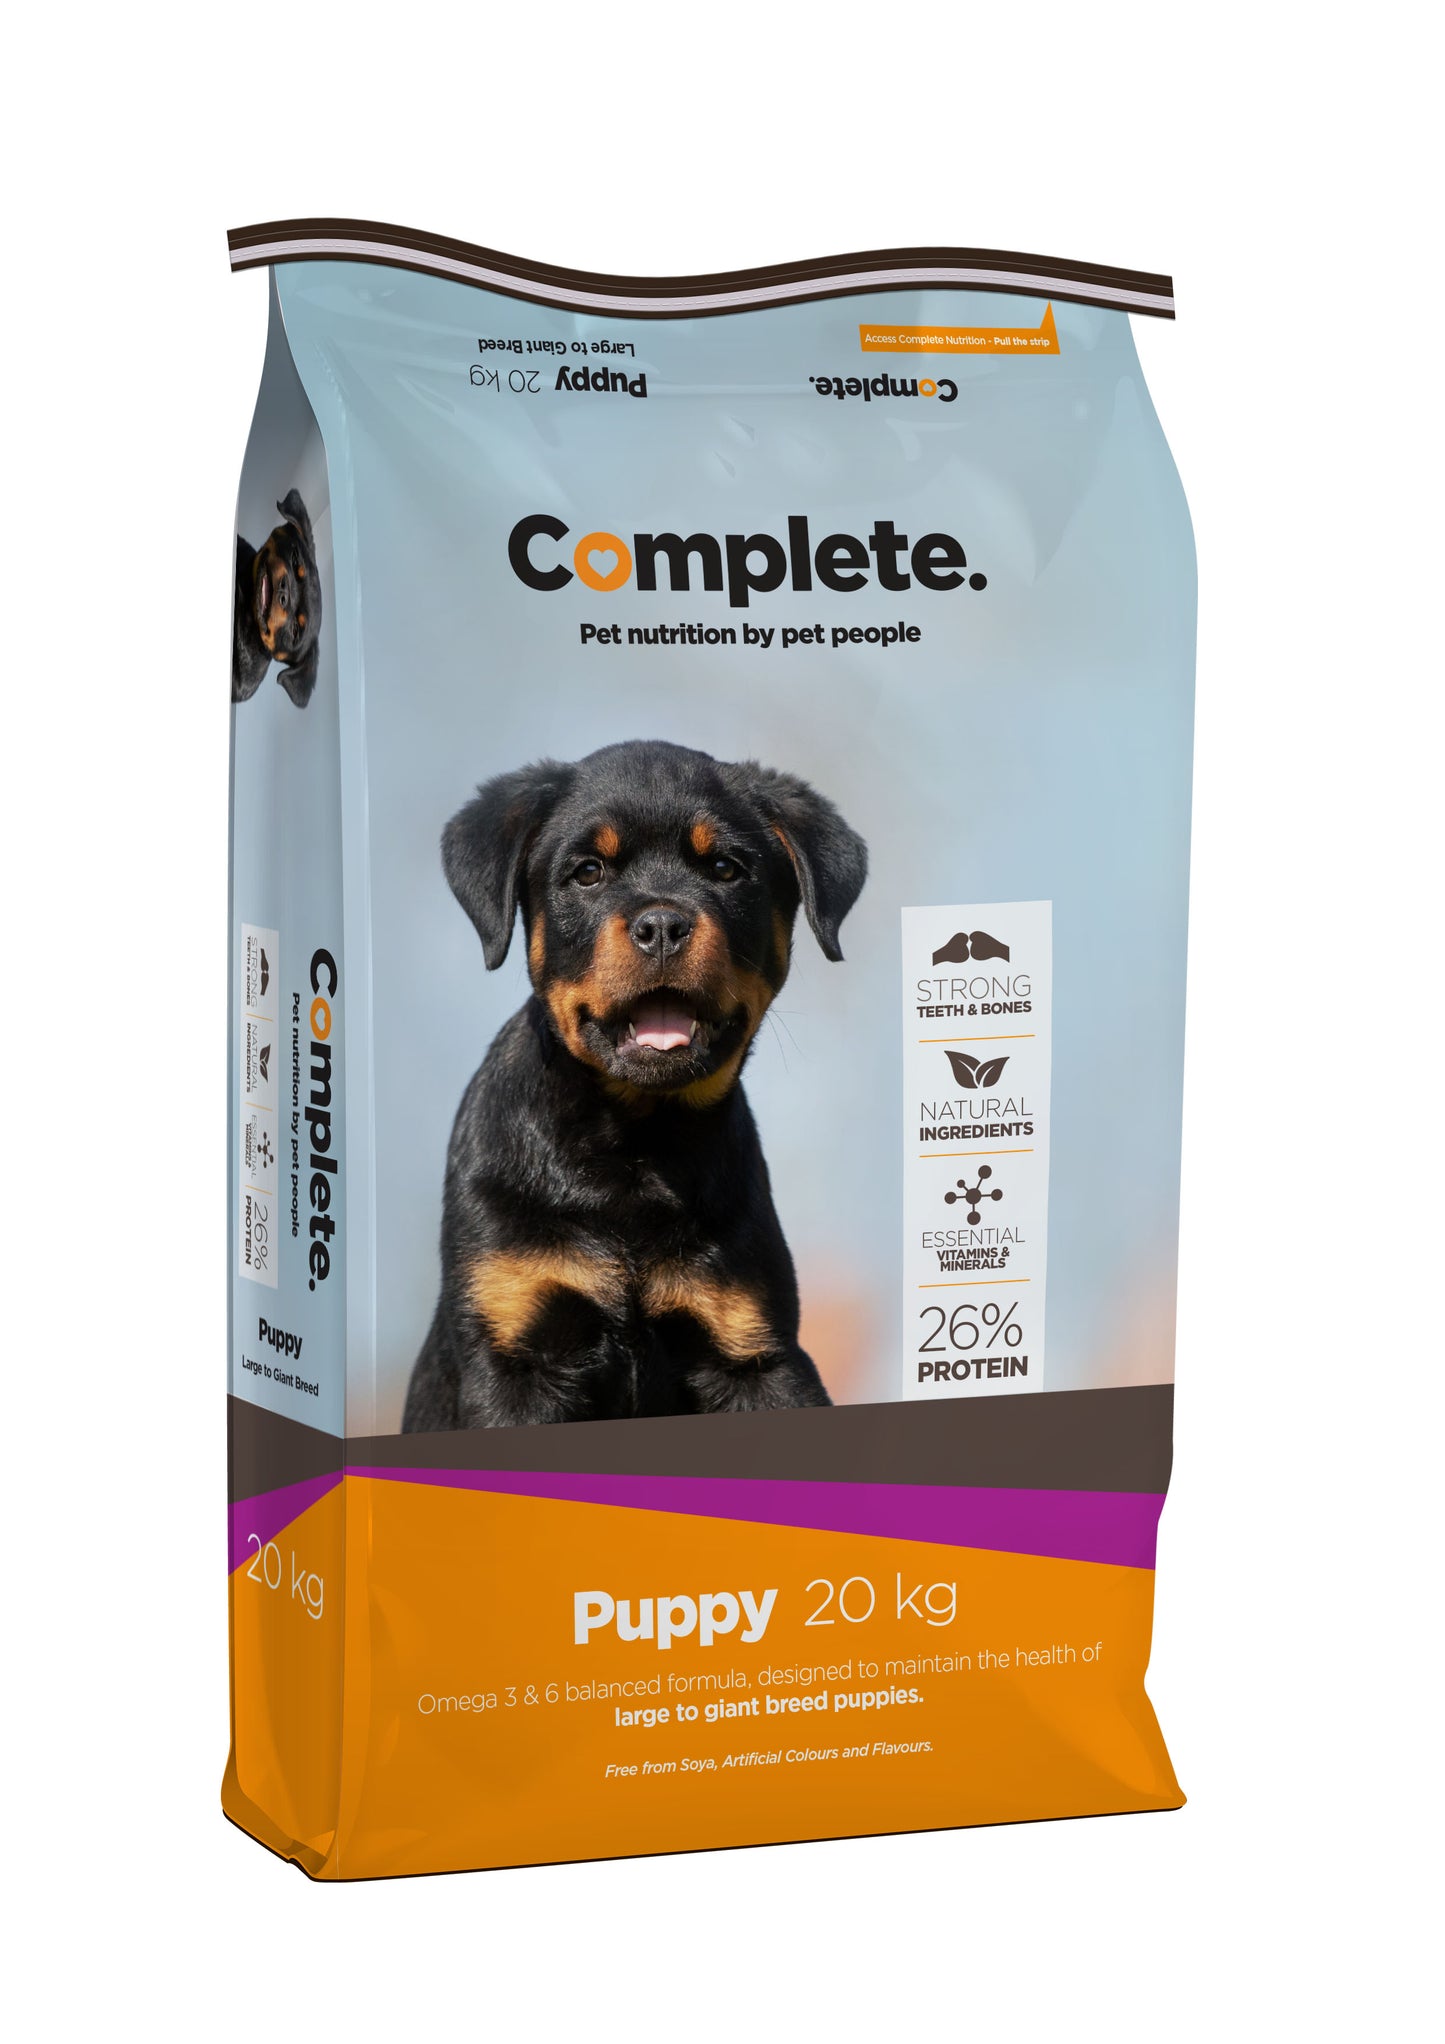 Puppy 20kg Complete Pet Food For Large to Giant breed puppies from Pets Planet - South Africa’s Best Online Pet Store for premium pet products, best pet store near me, Dog food, puppy food, dog food for puppies, pet food, dog wet food, dog bed, dog beds, washable dog bed, takealot dog bed, Complete Pet Nutrition, Complete pet nutrition dog food, hills dog food, optimizor dog food, royal canin dog food, jock dog food, bobtail dog food, canine cuisine, acana dog food, best dog food